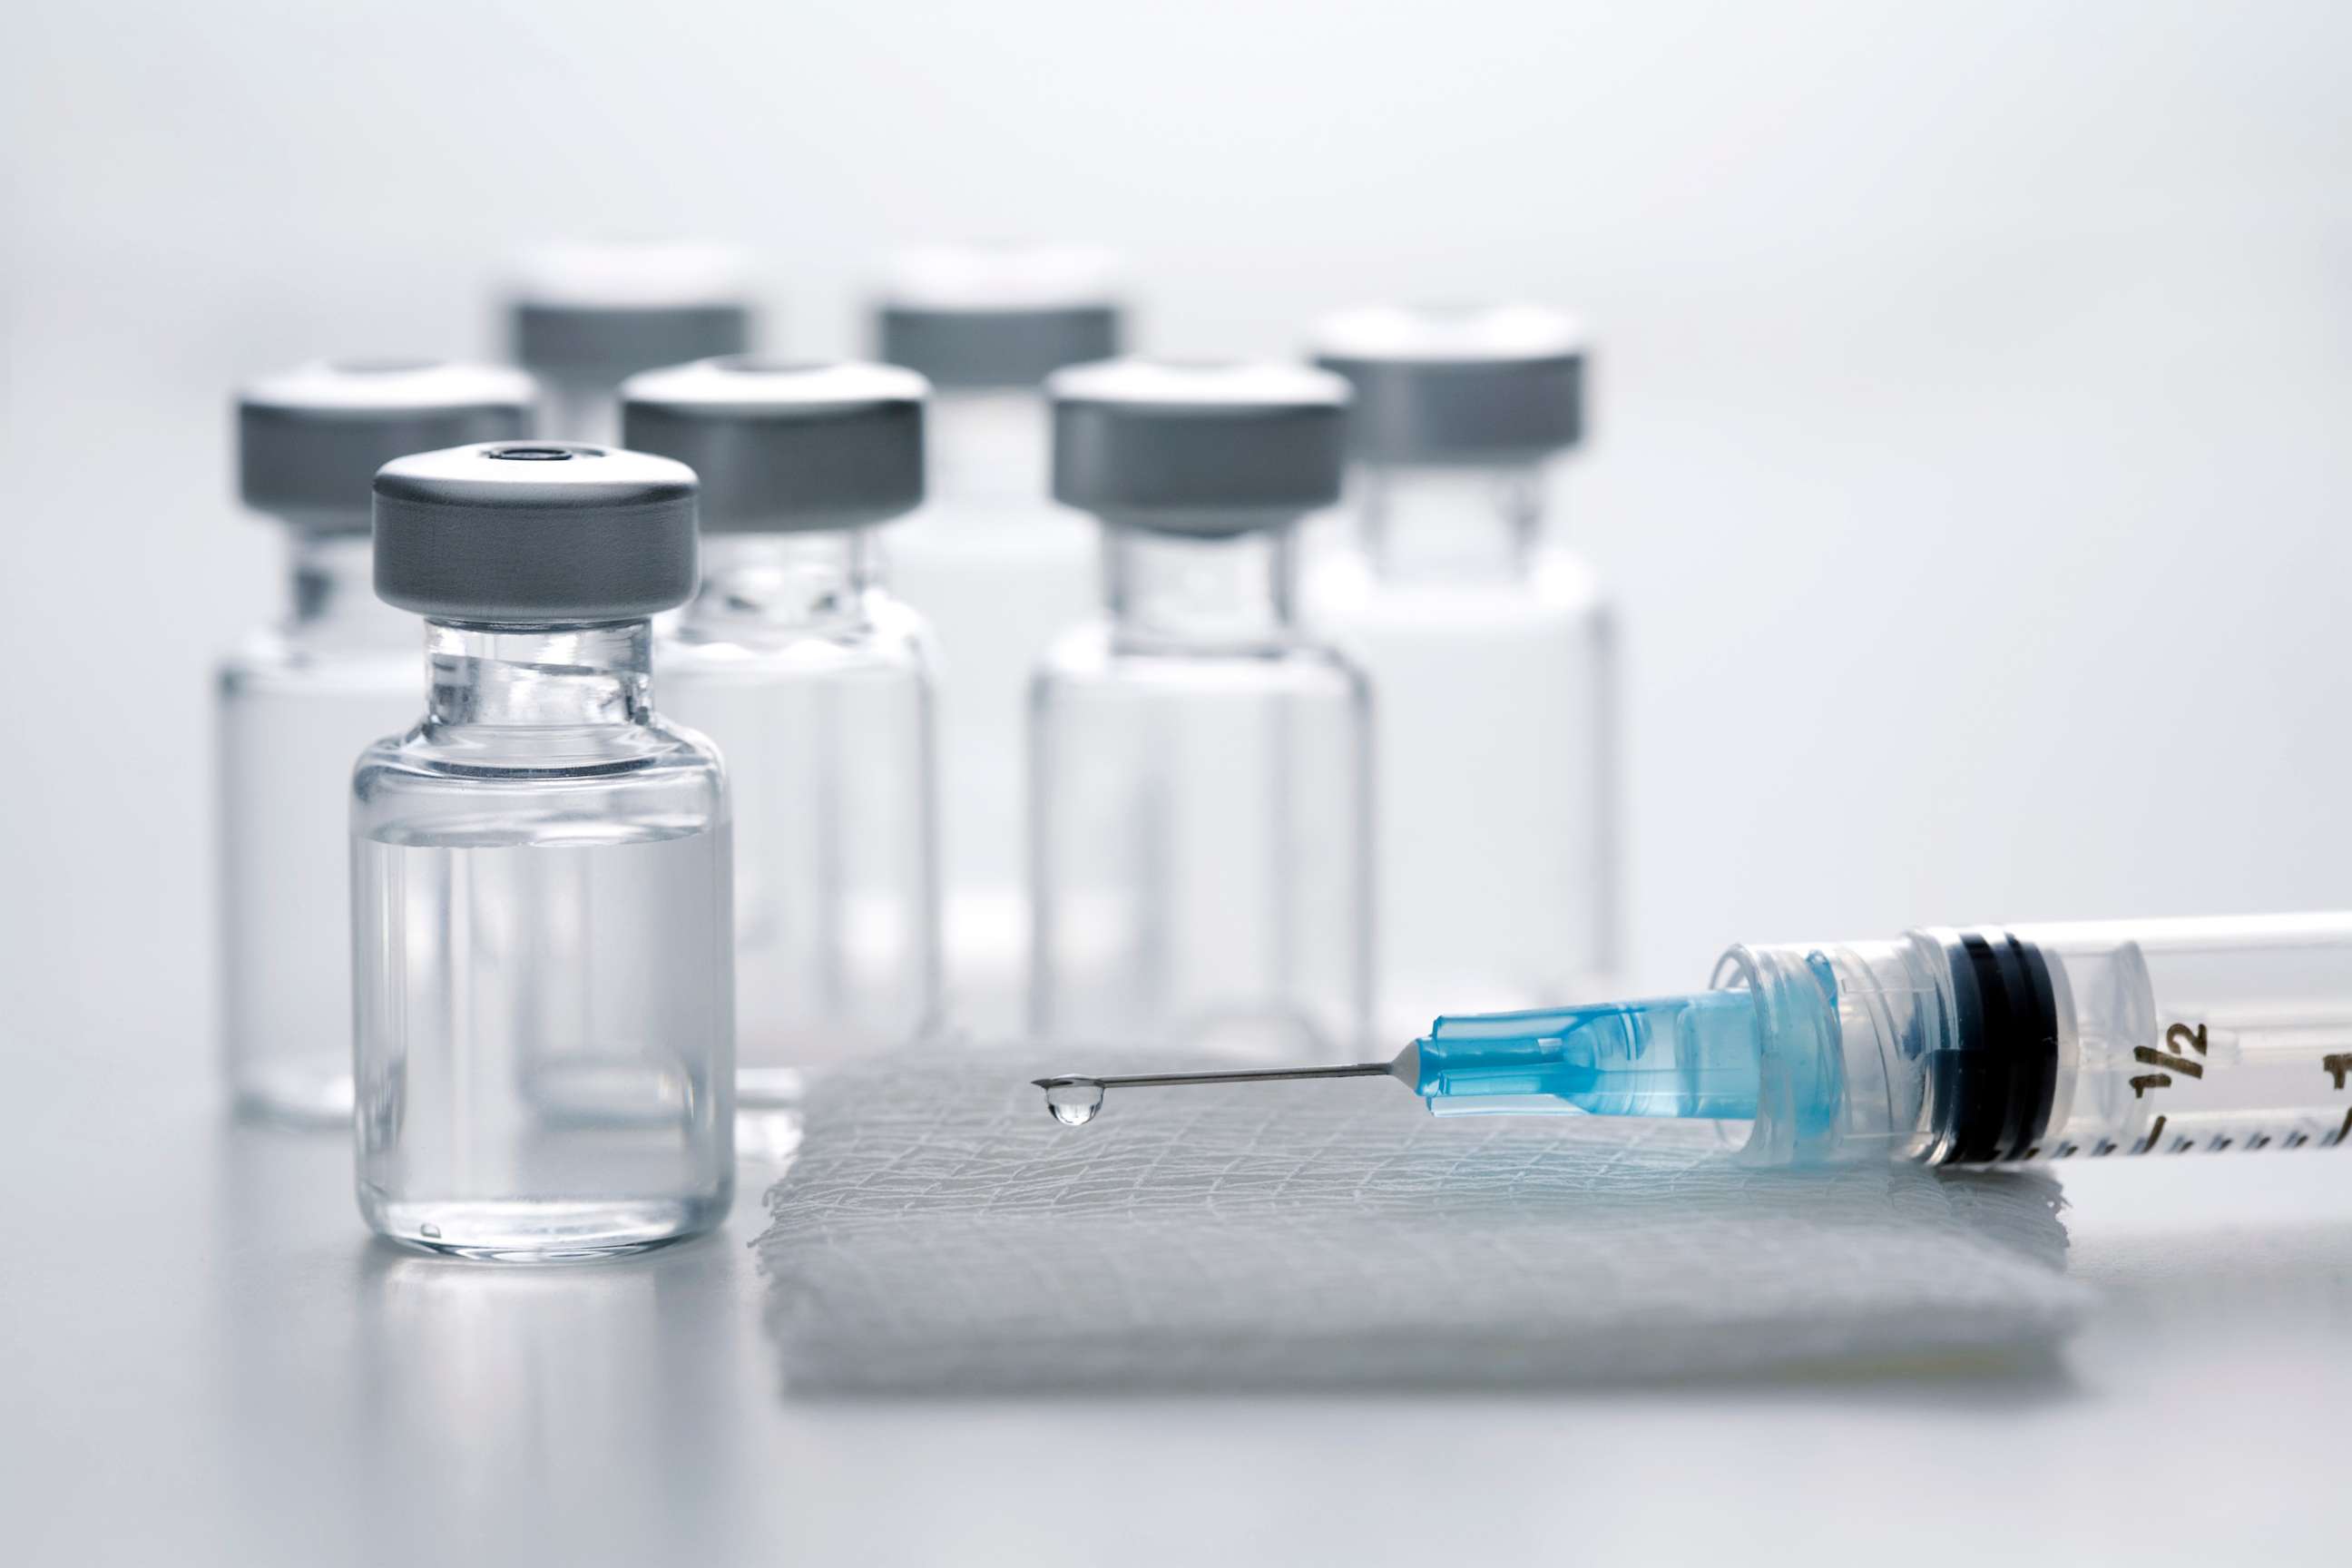 PHOTO: Vials and a syringe are seen in this undated stock image.